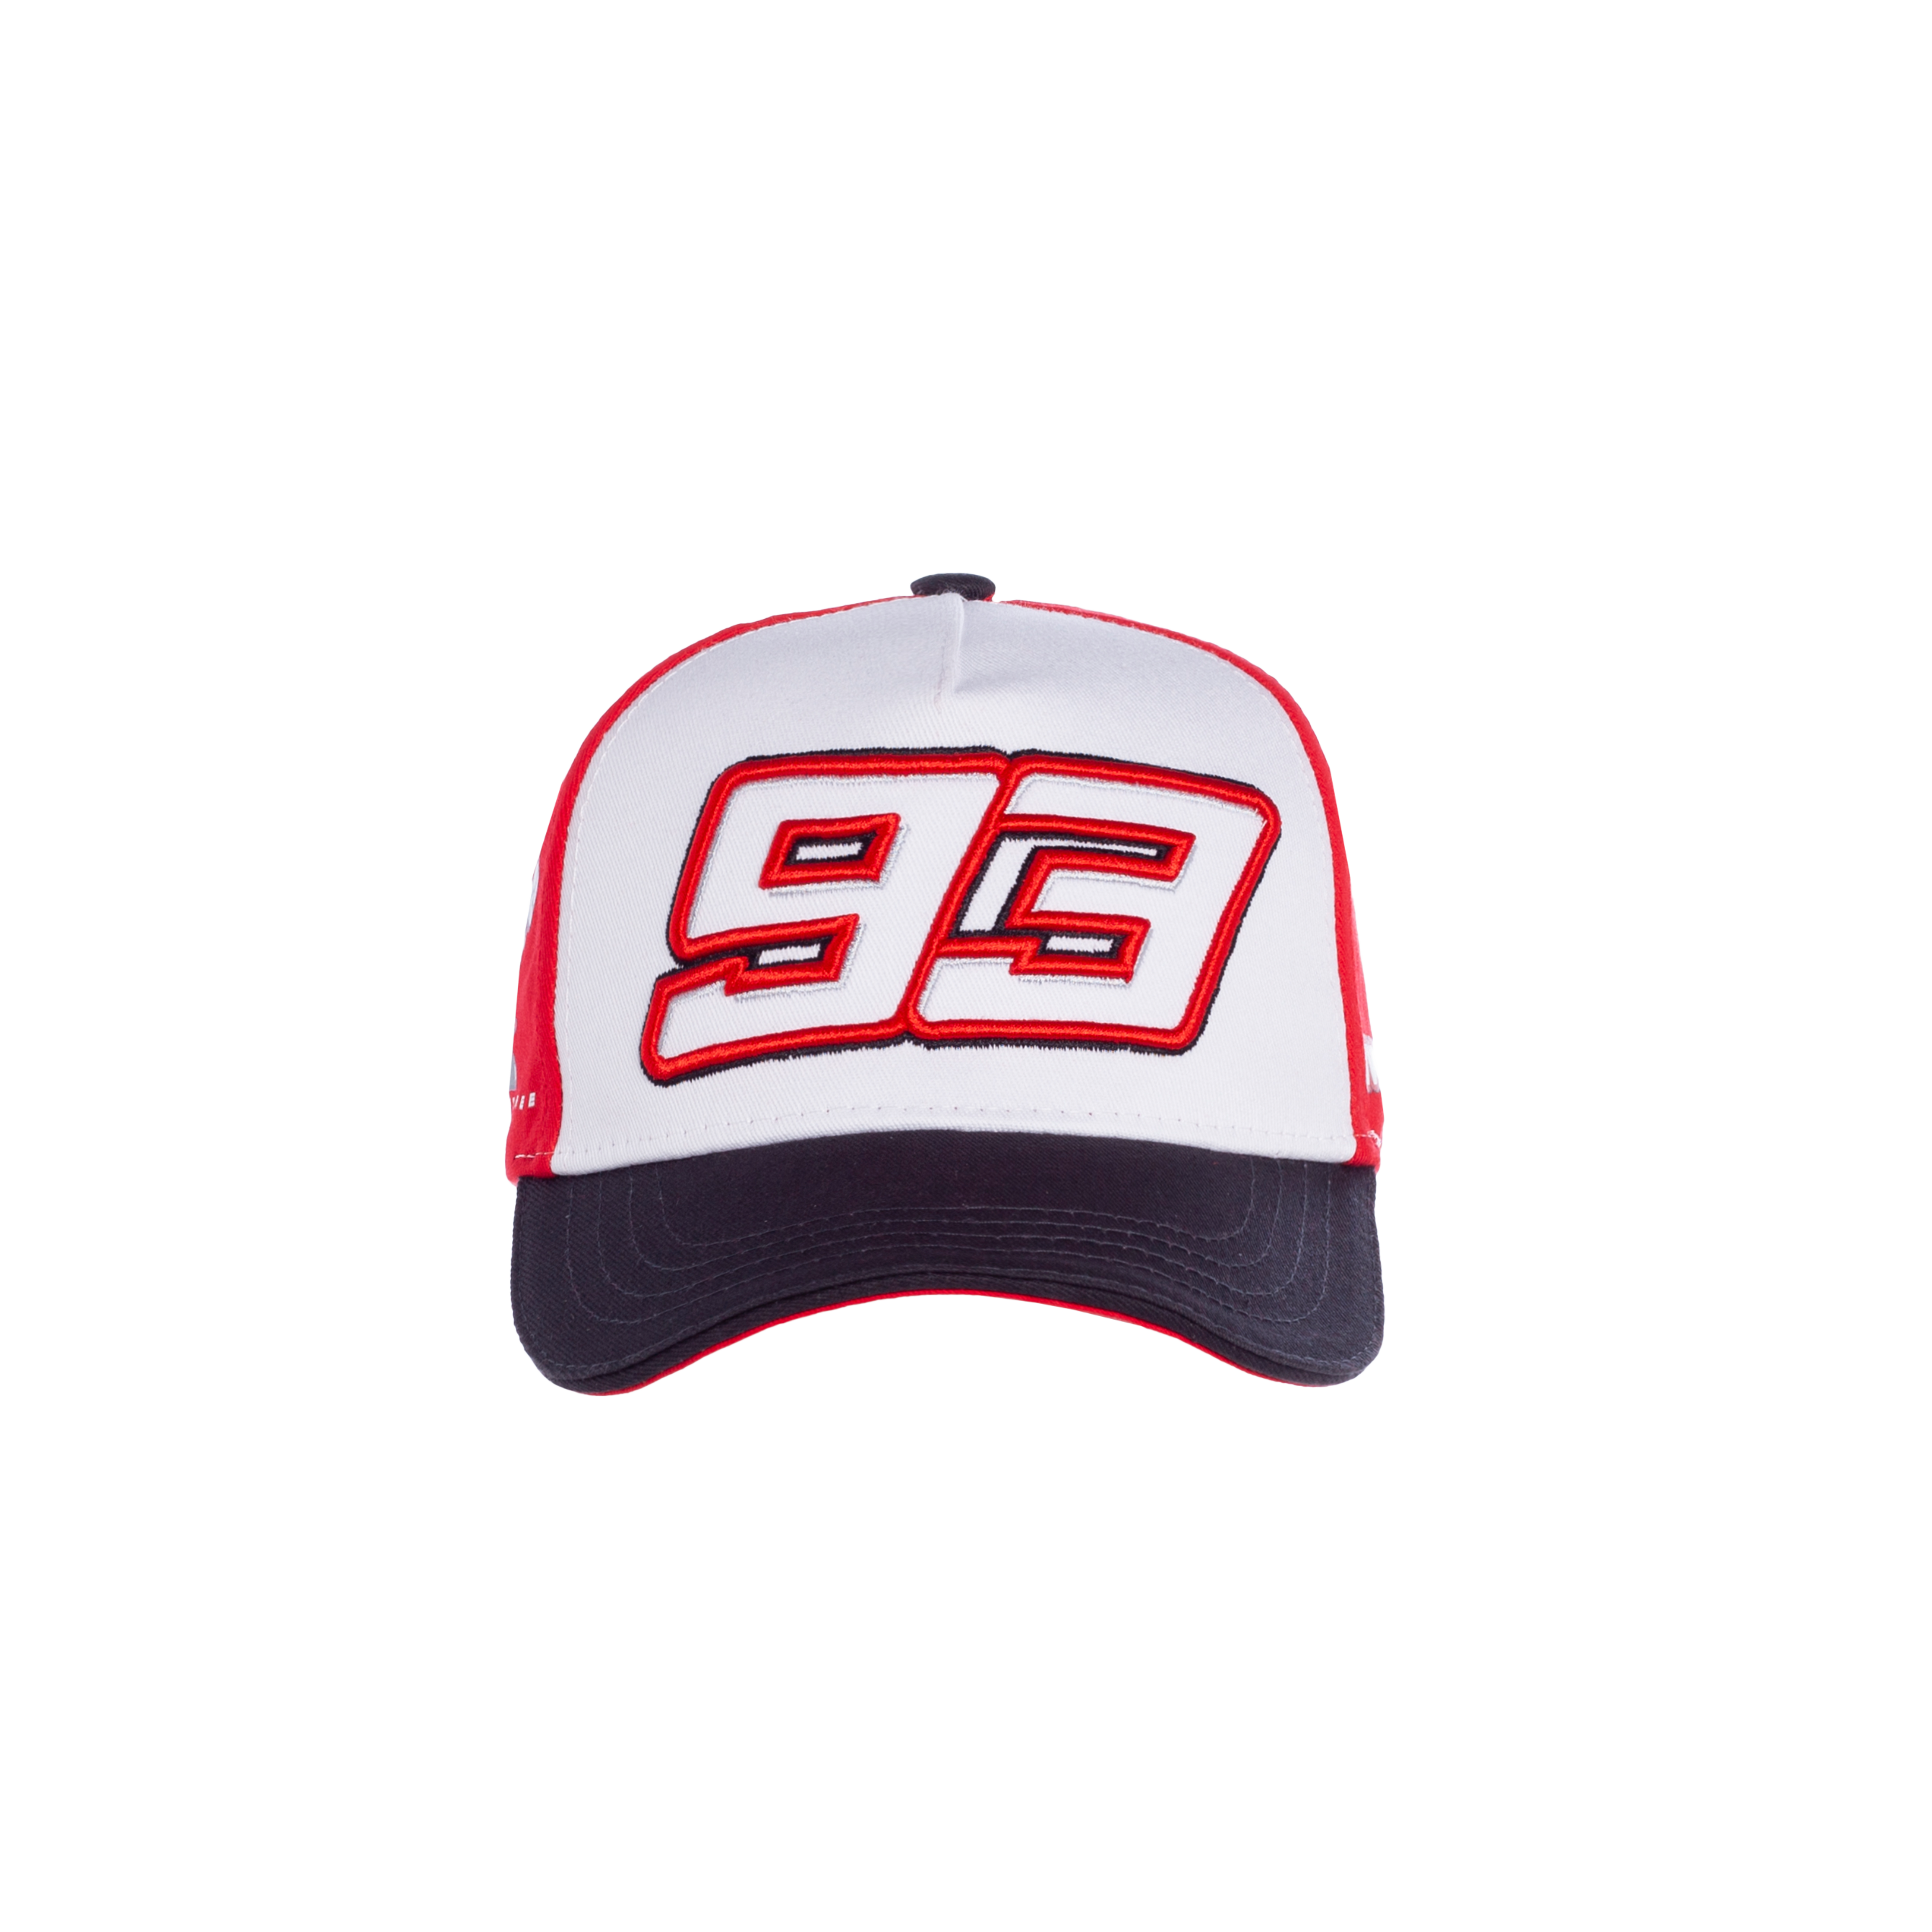 Marc Marquez 93 Flat Cap 93 Embroidered in red White Letters Located in USA 